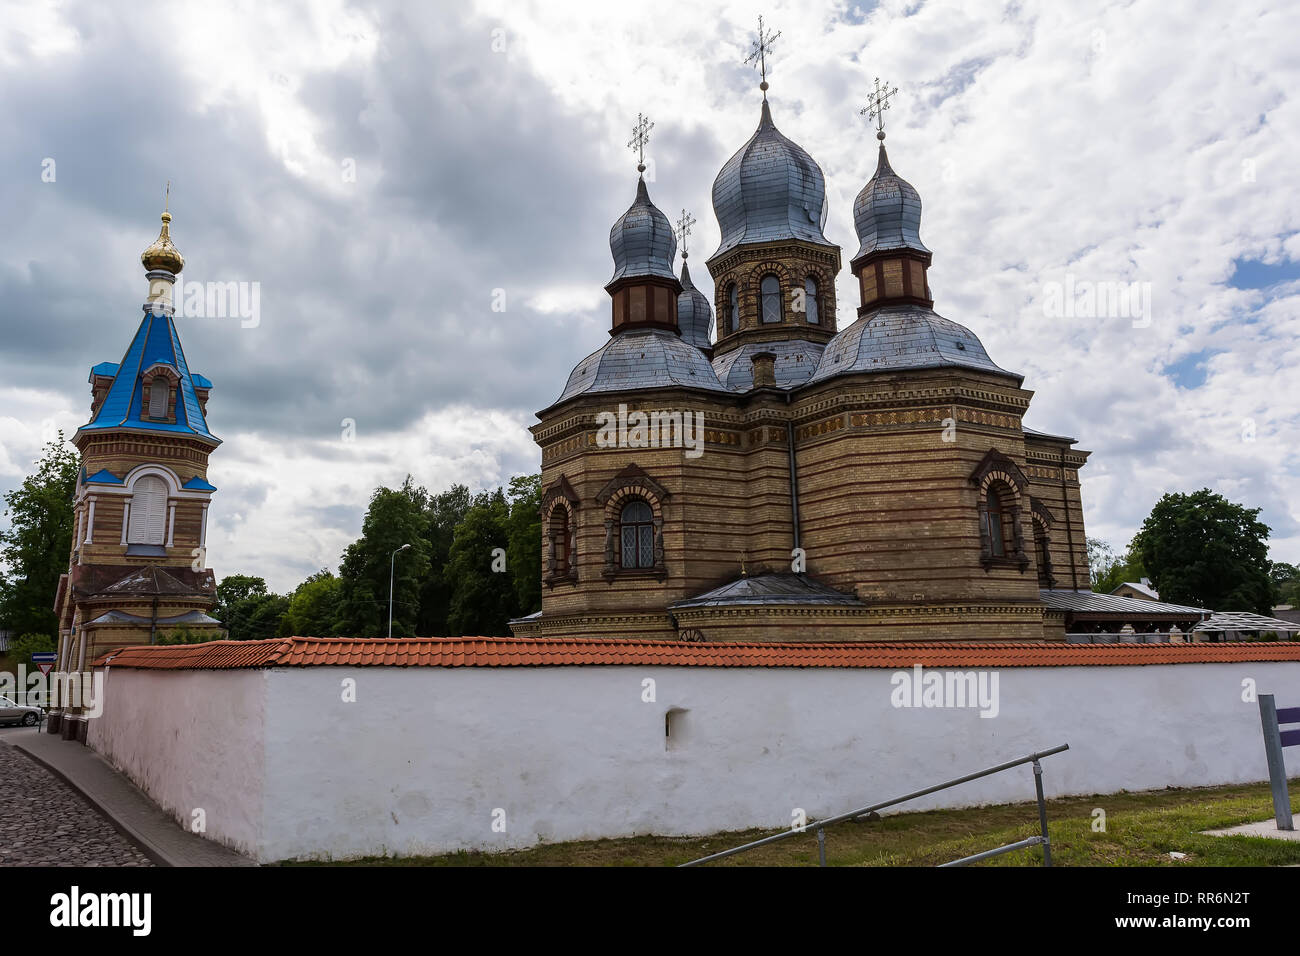 Jekabpils Orthodox Church of The Holy Spirit against cloudy sky. The church was built in the second part of the 19th century in Byzantine style. Its f Stock Photo